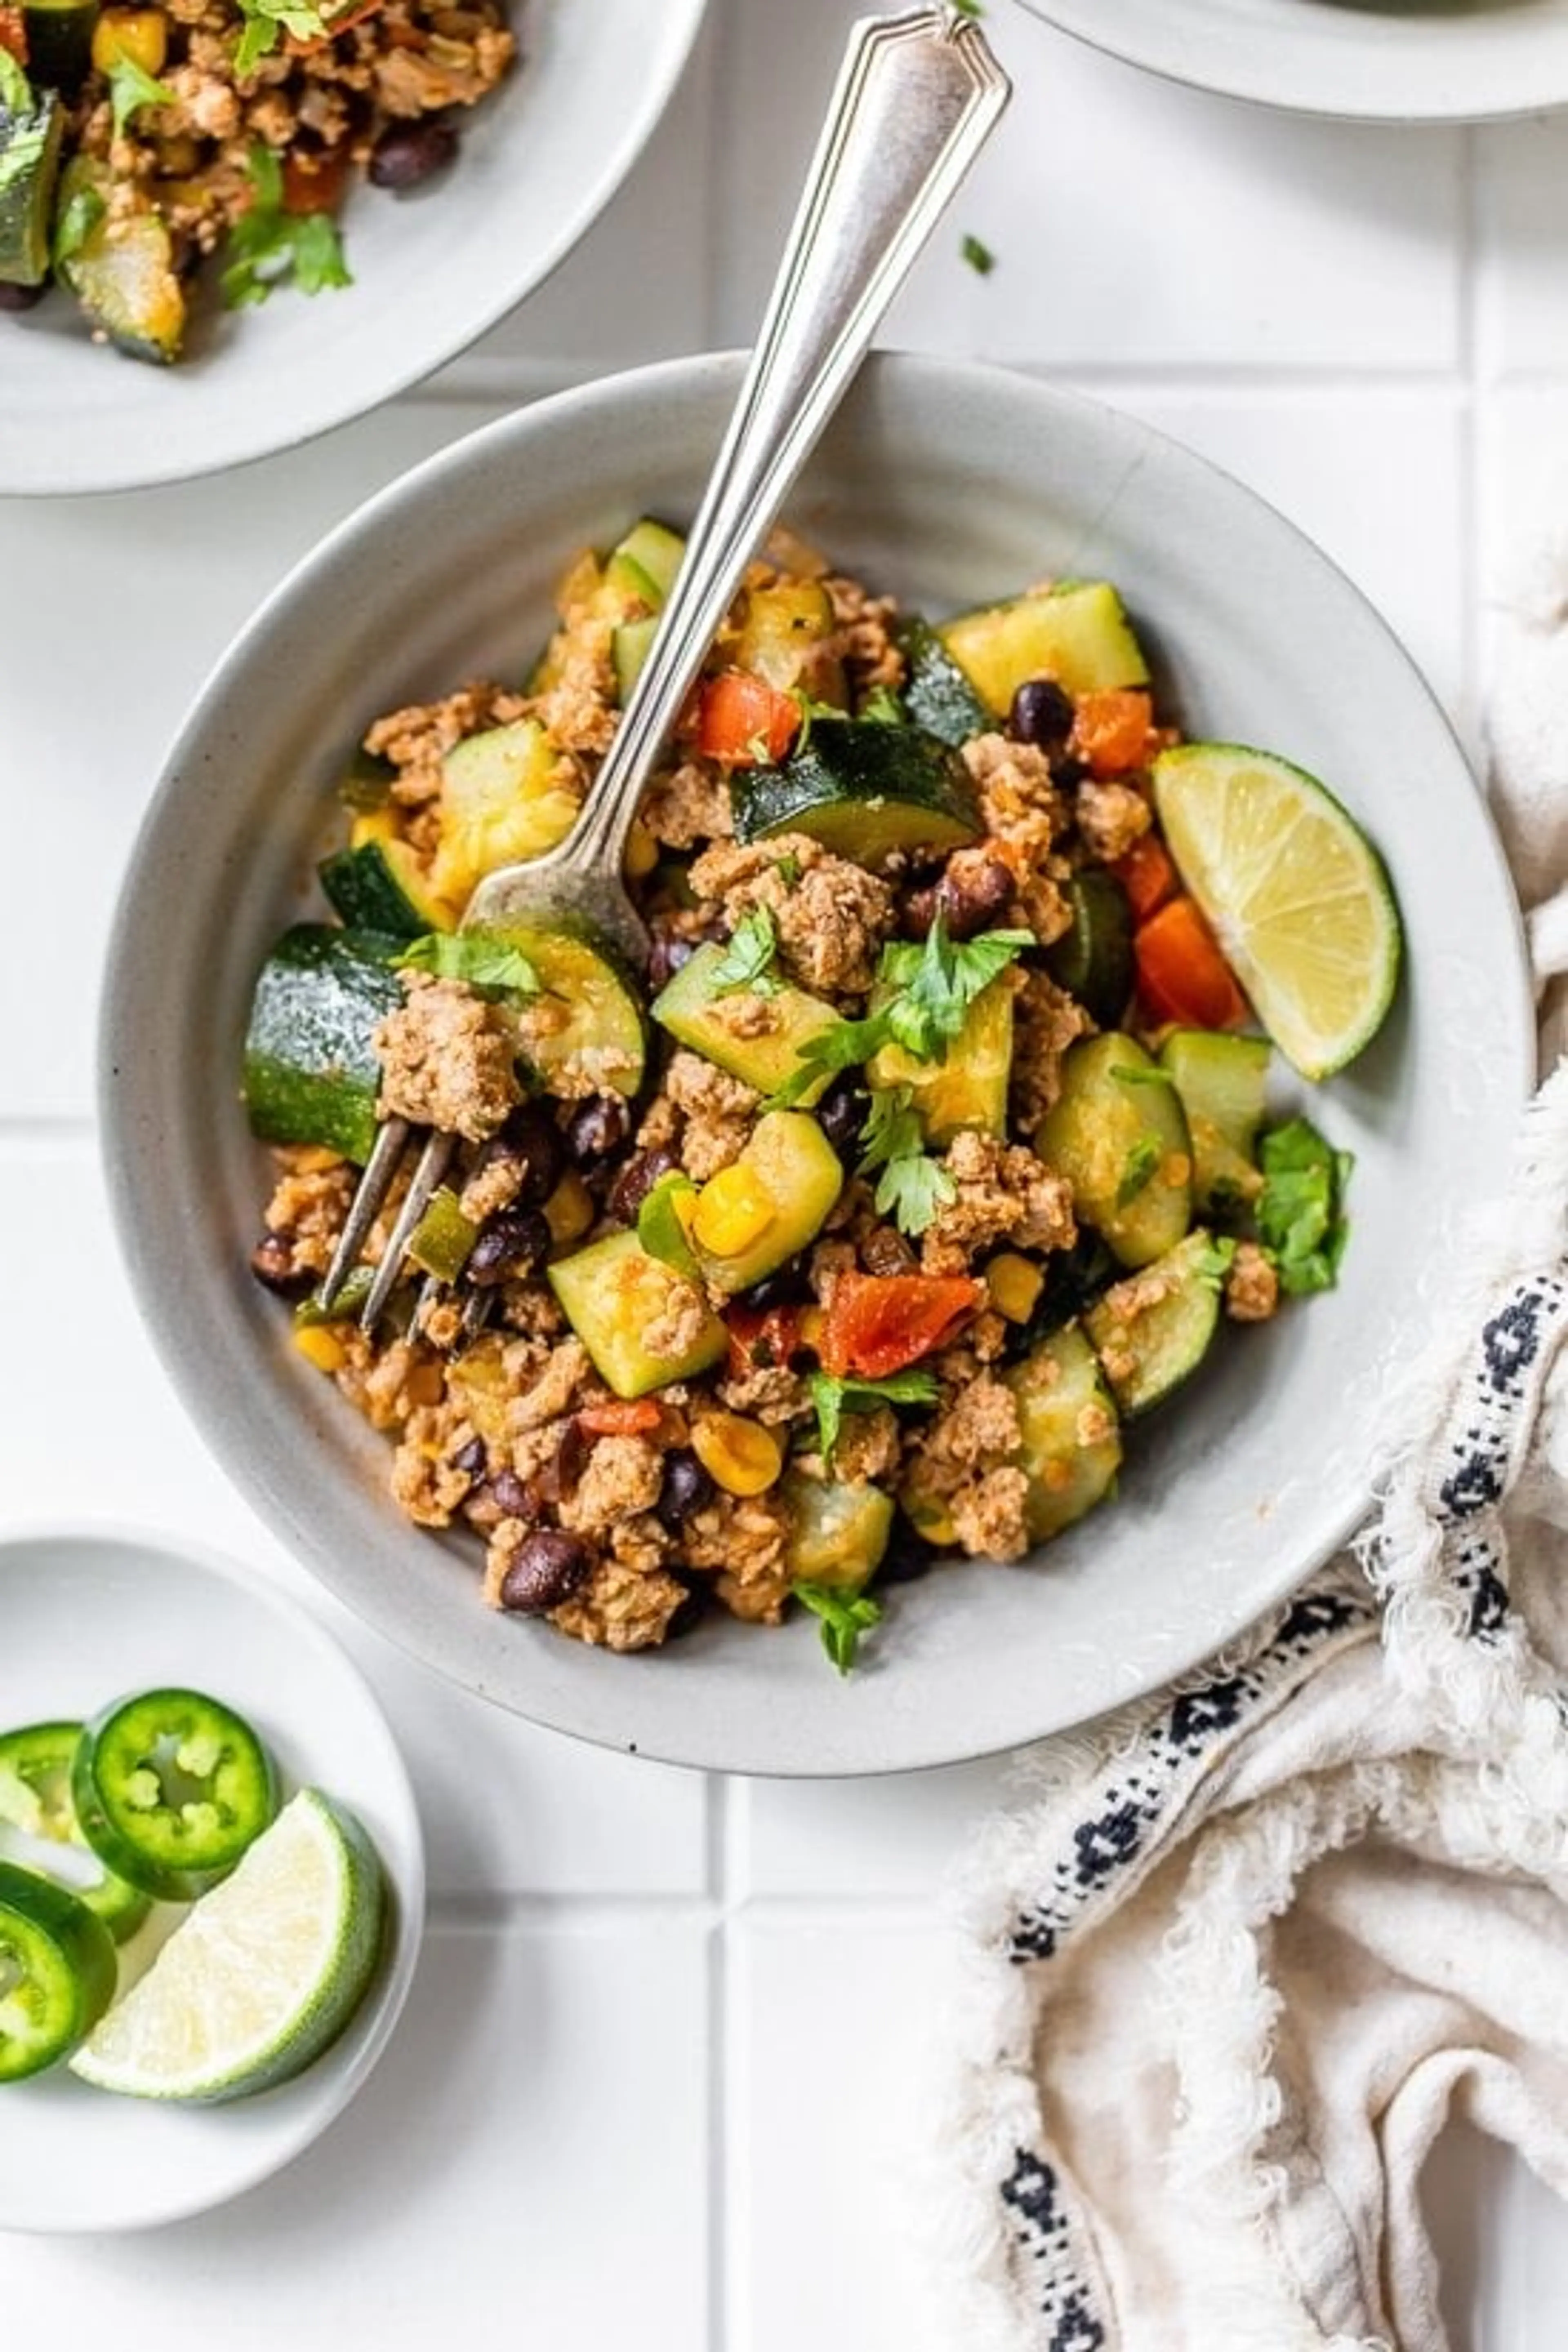 Ground Turkey Skillet with Zucchini, Corn, Black Beans and T